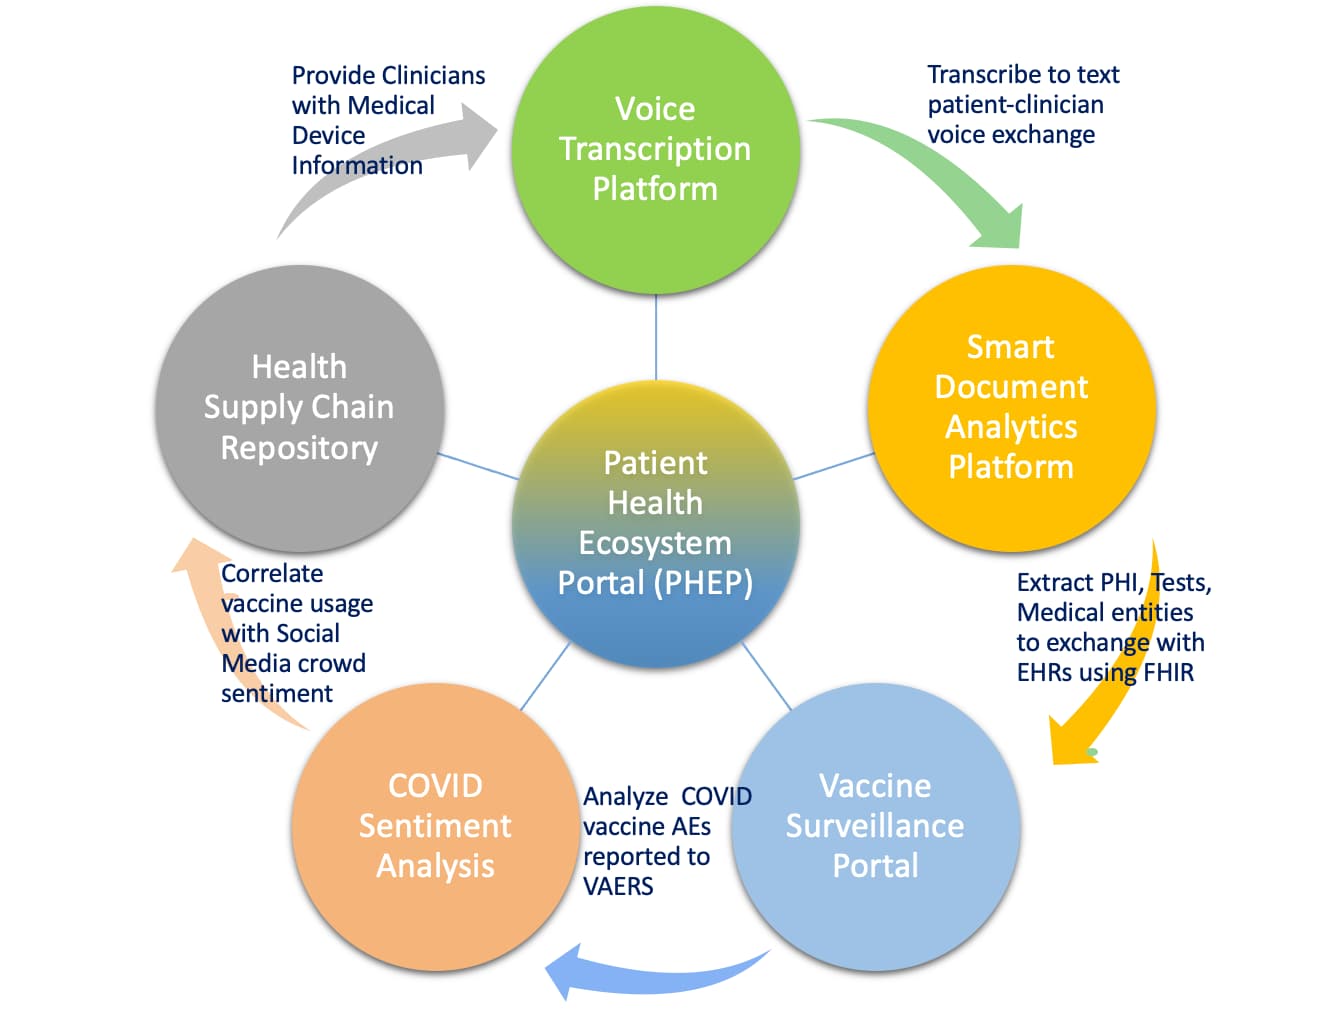 6 circles showing the interlocking parts of the Dovel platform: Voice transcription, document analytics, vaccine surveillance, COVID sentiment analysis, Healthy supply chain repository, and patient health ecosystem portal